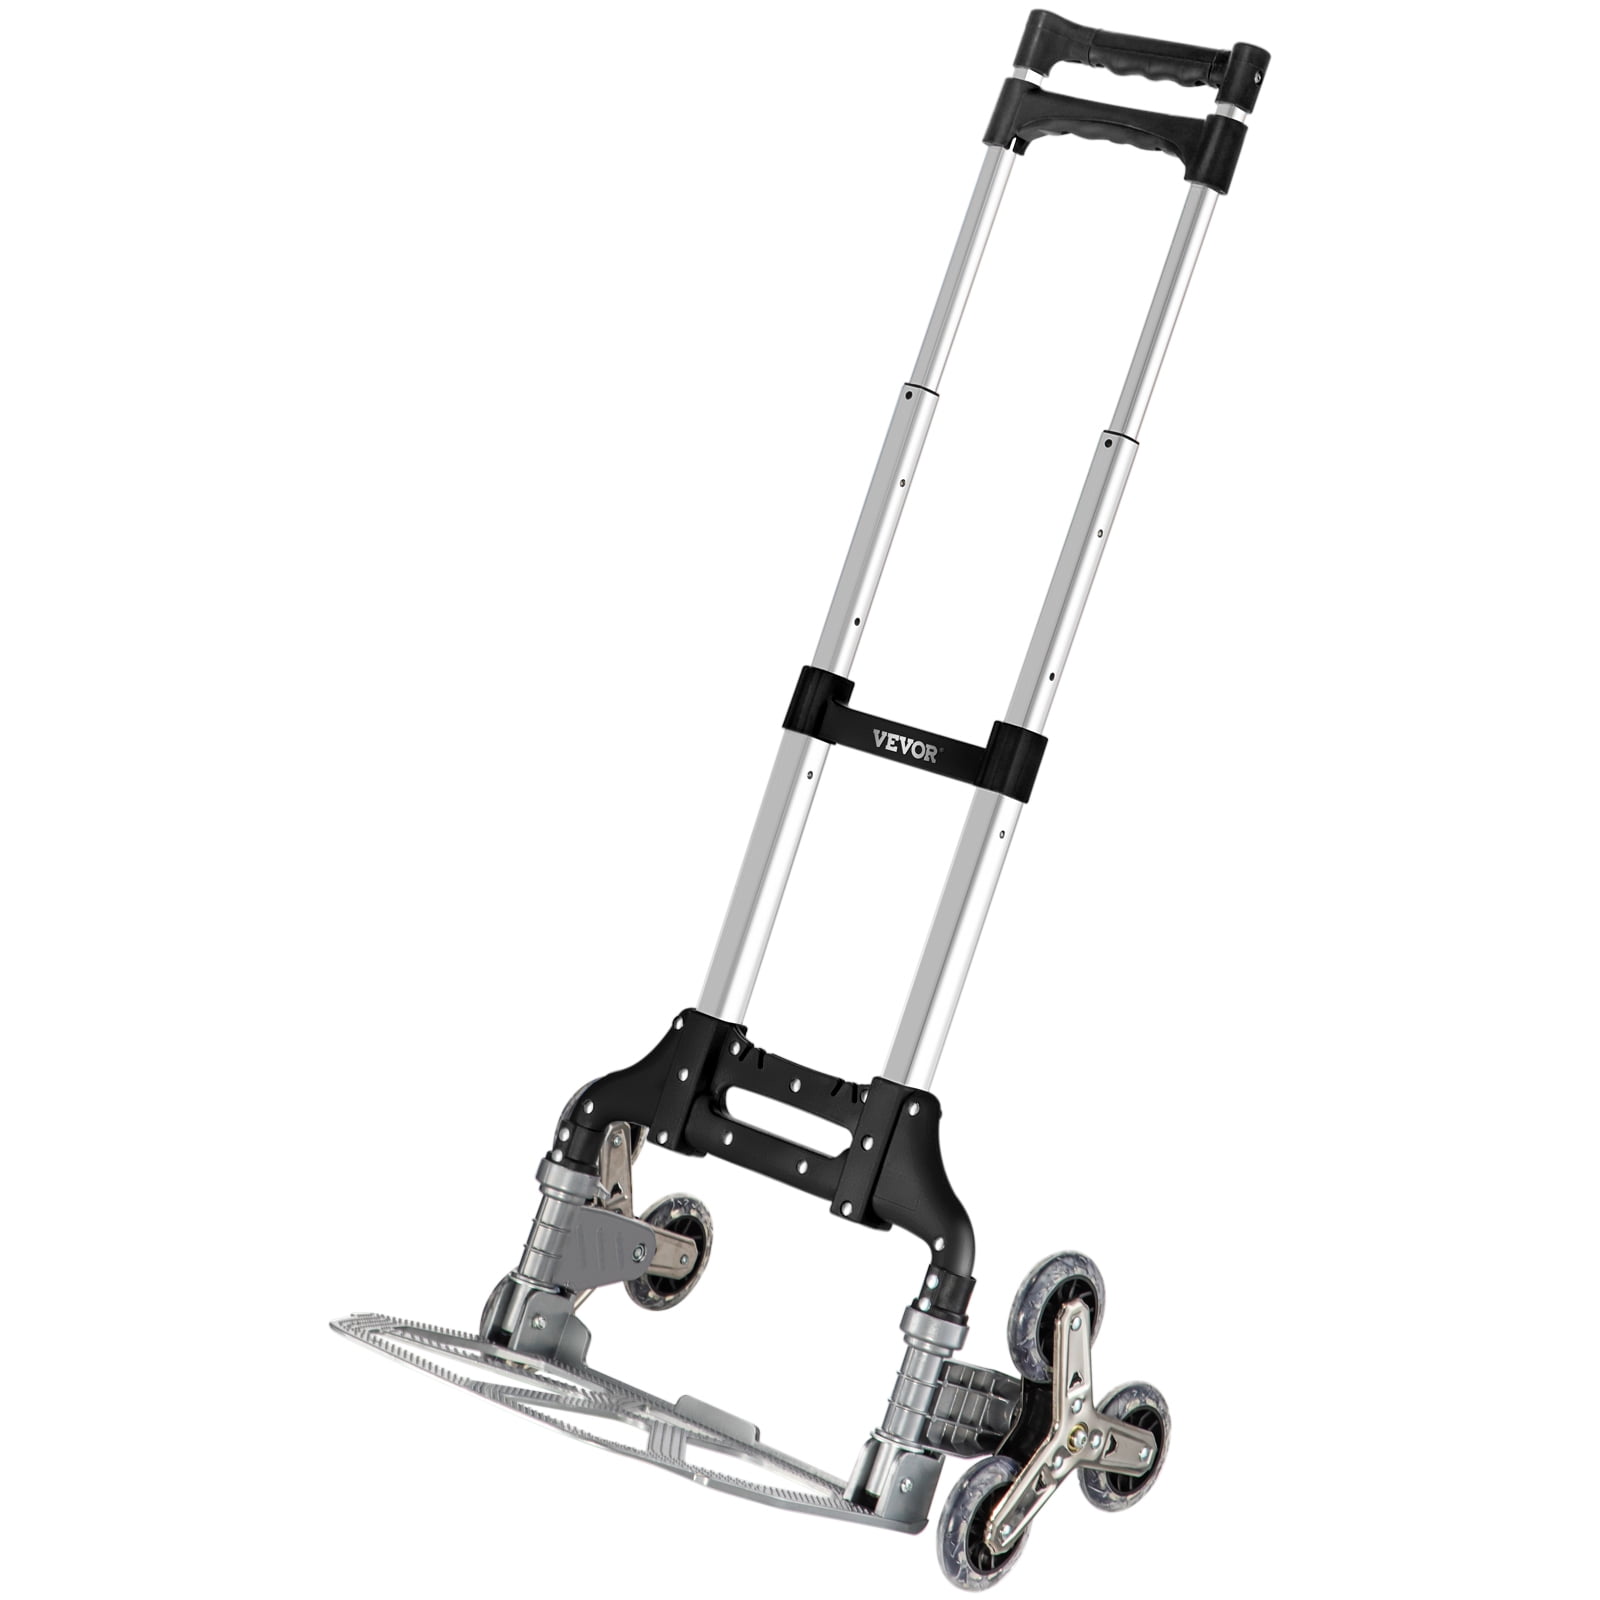 Shopping Groceries VEVOR Stair Climbing Cart 15.4 x 10.6 Folding Hand Truck 176 LBS Weight Capacity Aluminum Alloy Hand Cart with 10 Crystal Castors Suitable for Carry Luggage Transport Goods 